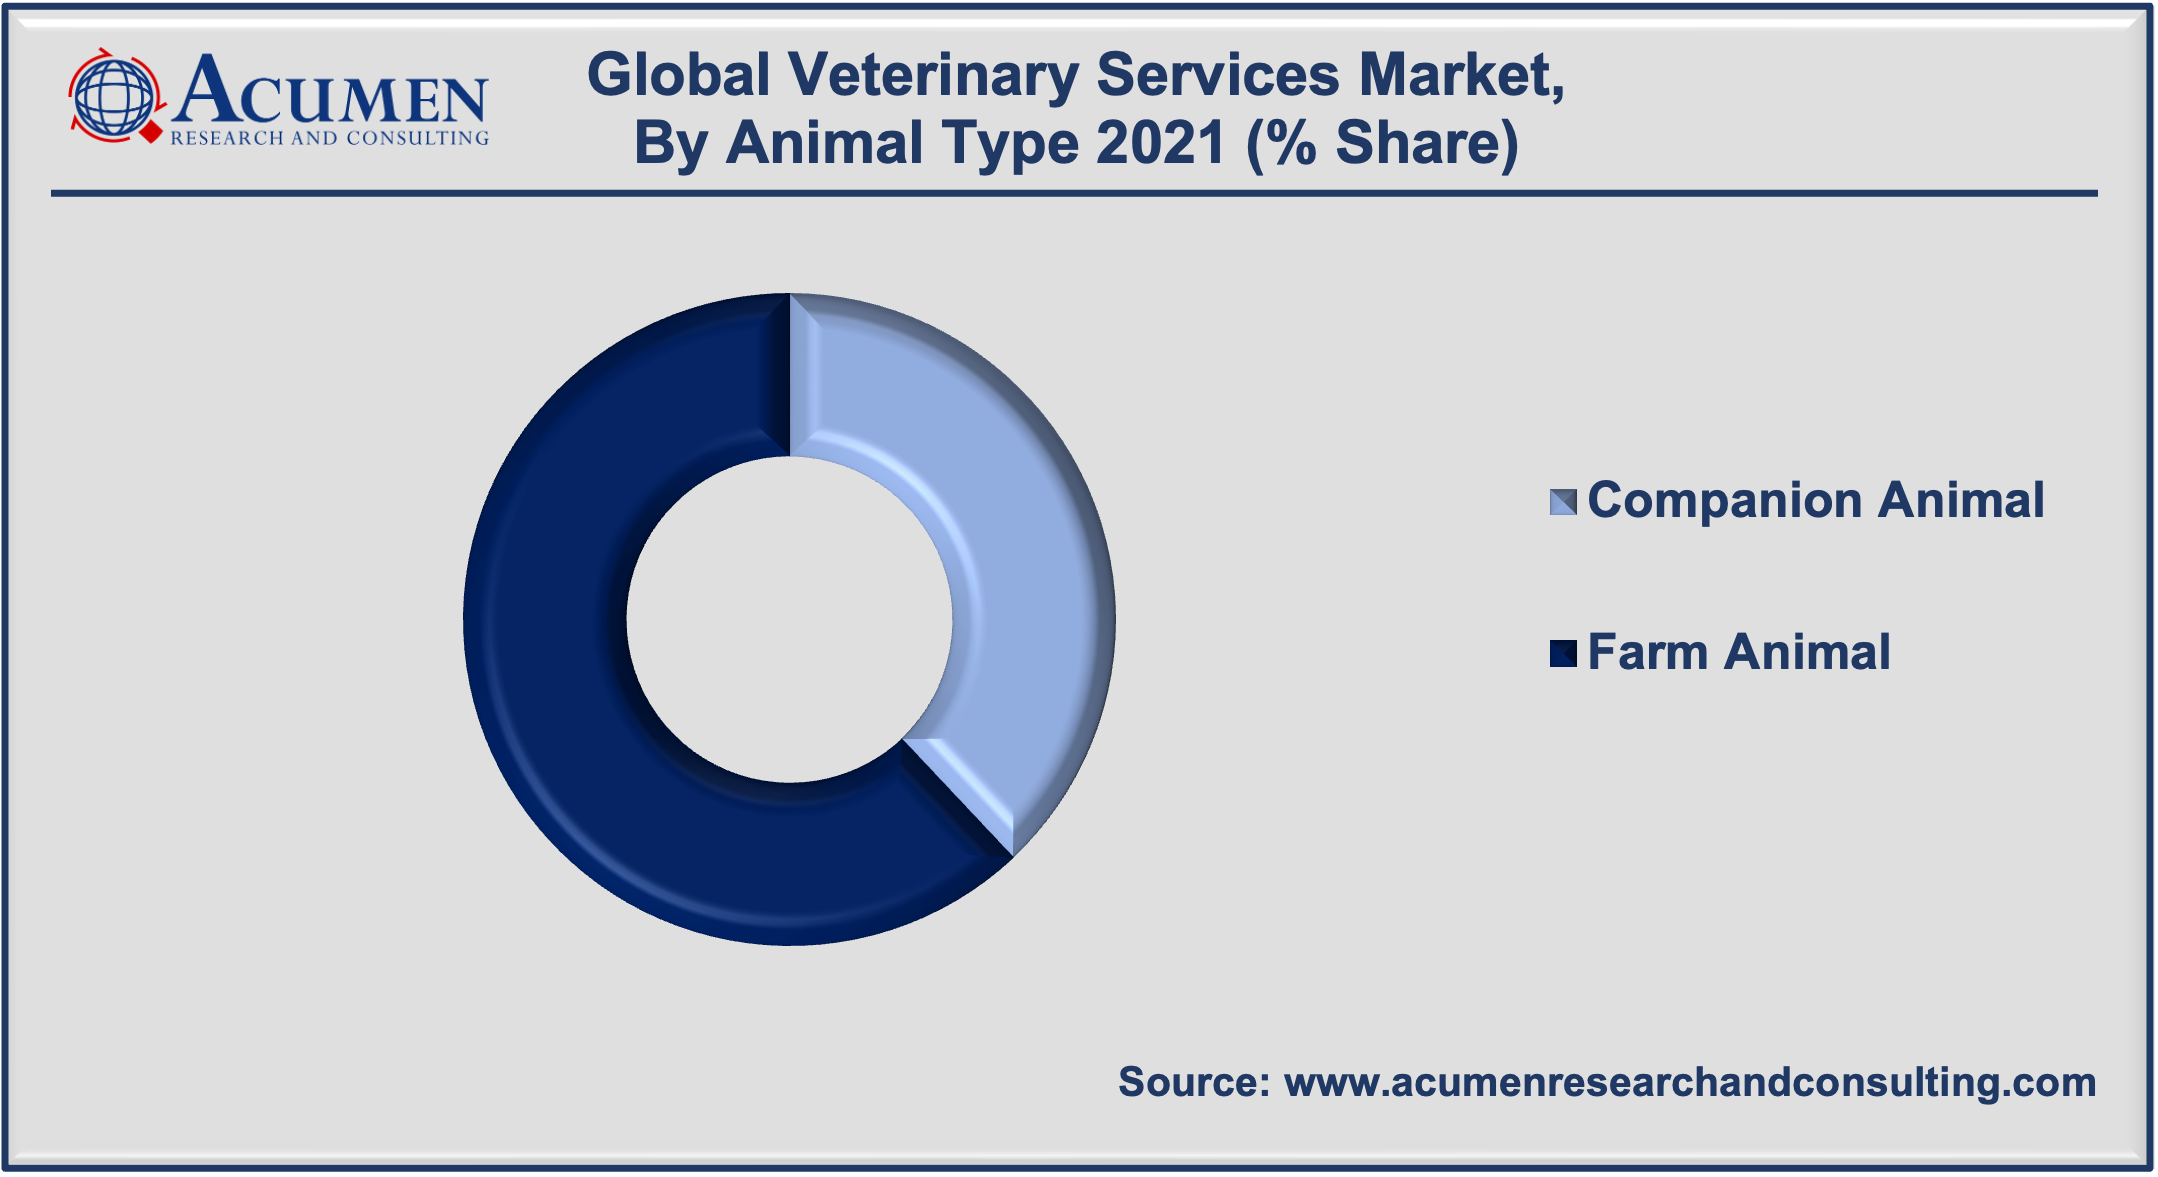 Veterinary Services Market Share accounted for USD 99.5 Billion in 2021 and is expected to reach USD 162.5 Billion by 2030 growing at a CAGR of 5.8% during the forecast timeframe from 2022 to 2030.